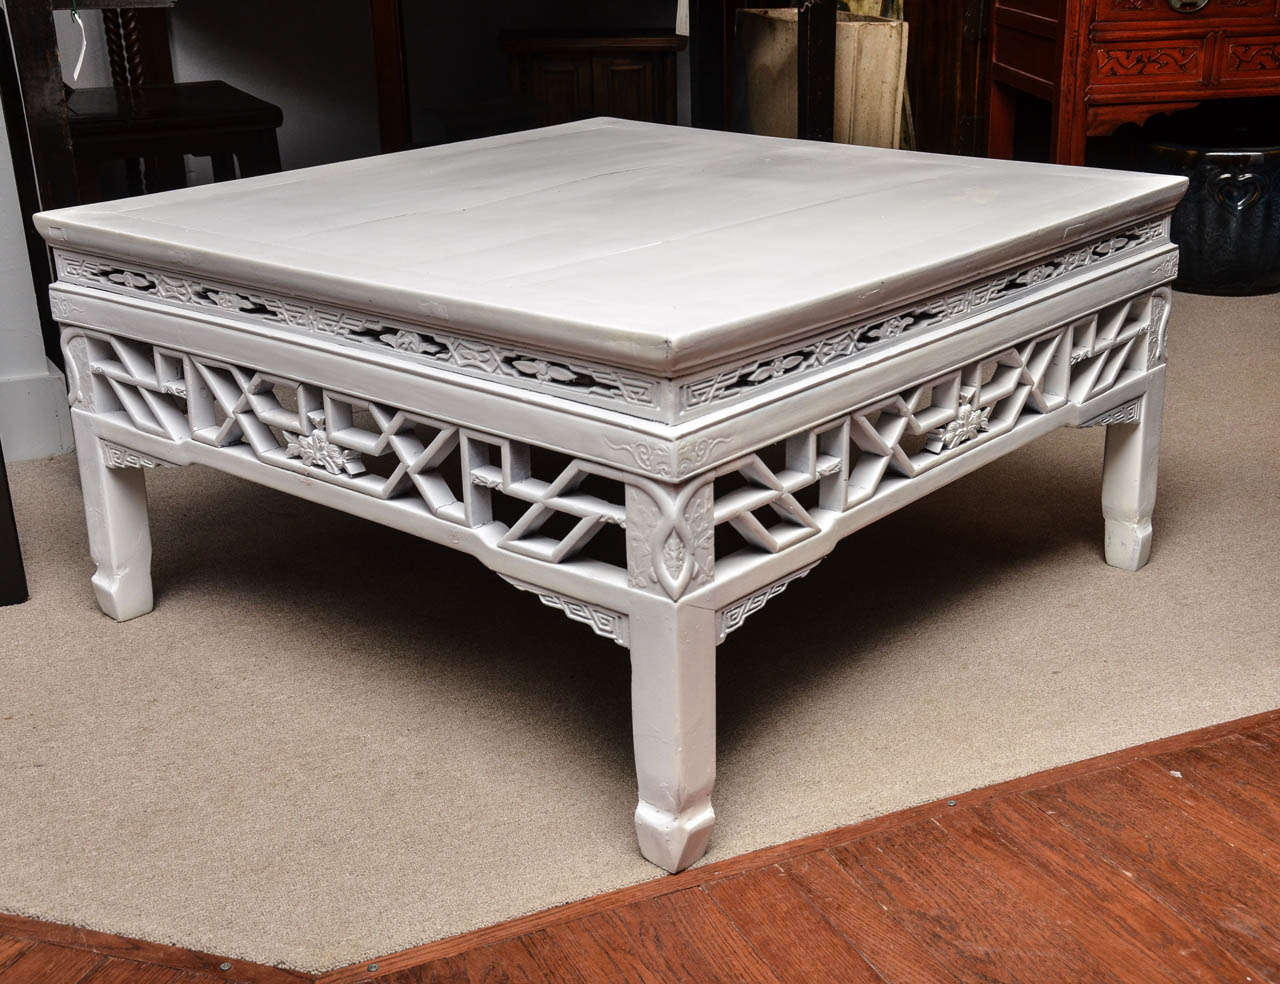 Late 19th century Qing dynasty carved tea table refinished in white lacquer